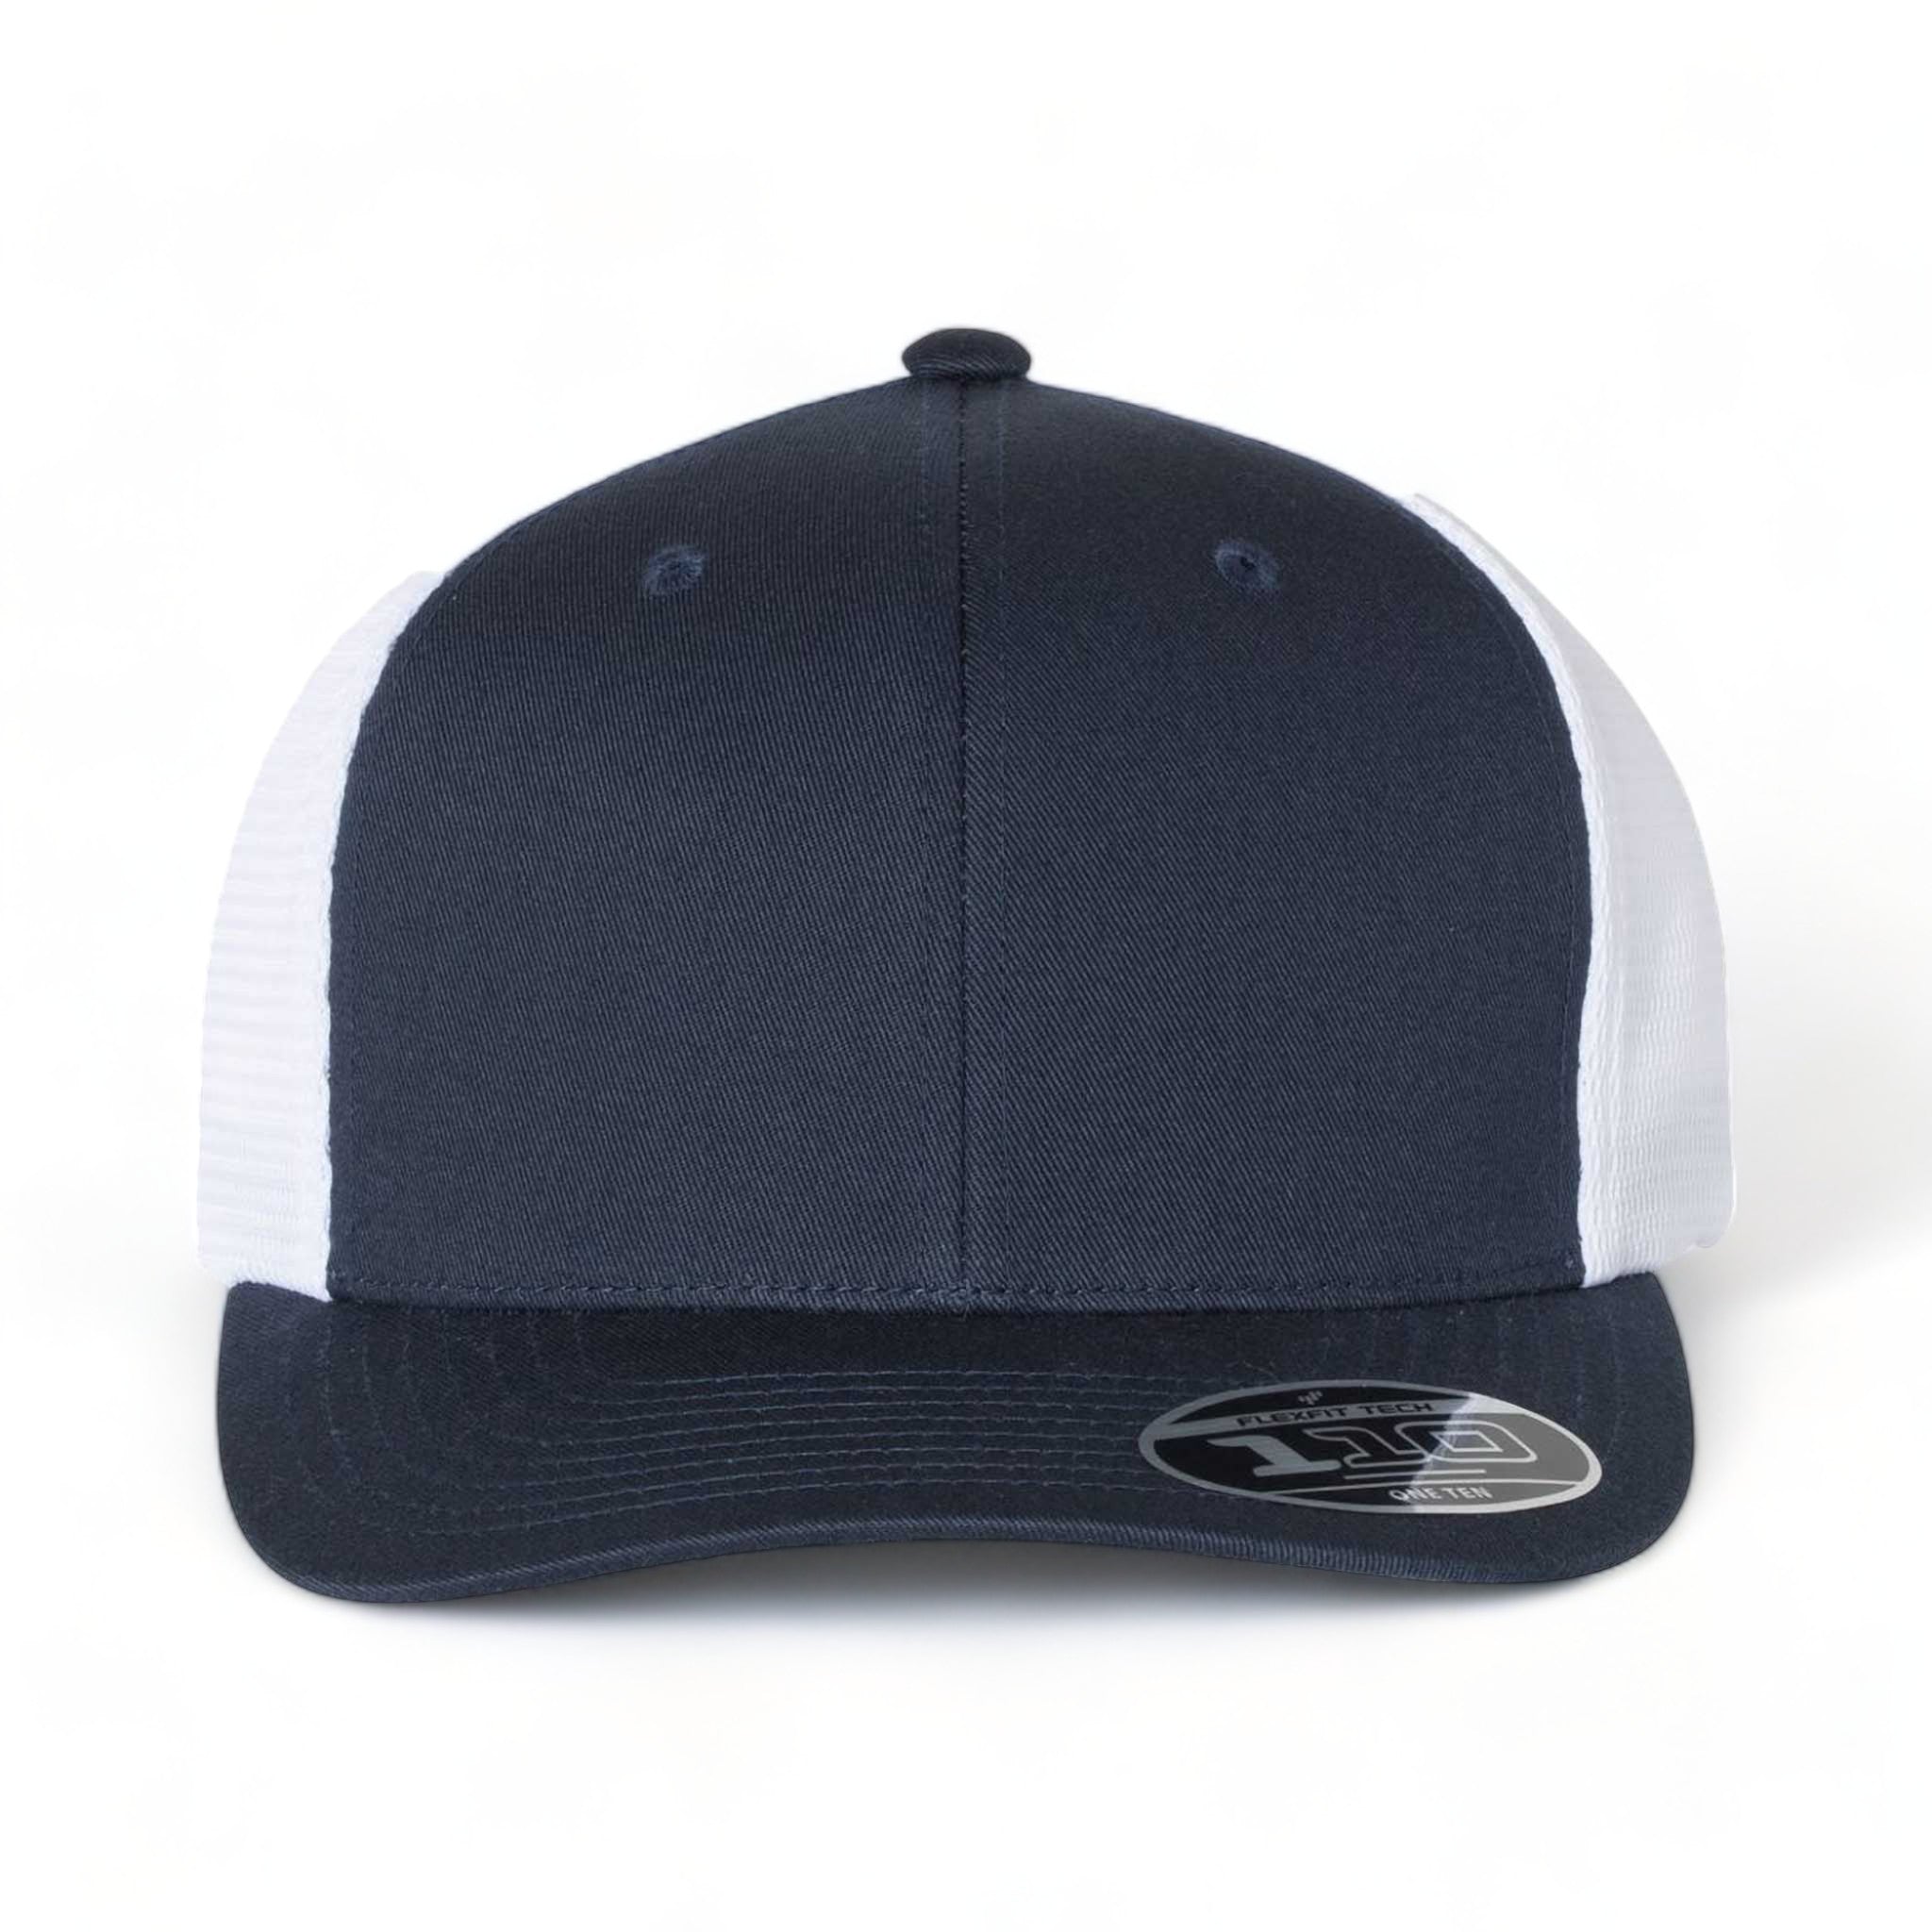 Front view of Flexfit 110M custom hat in navy and white